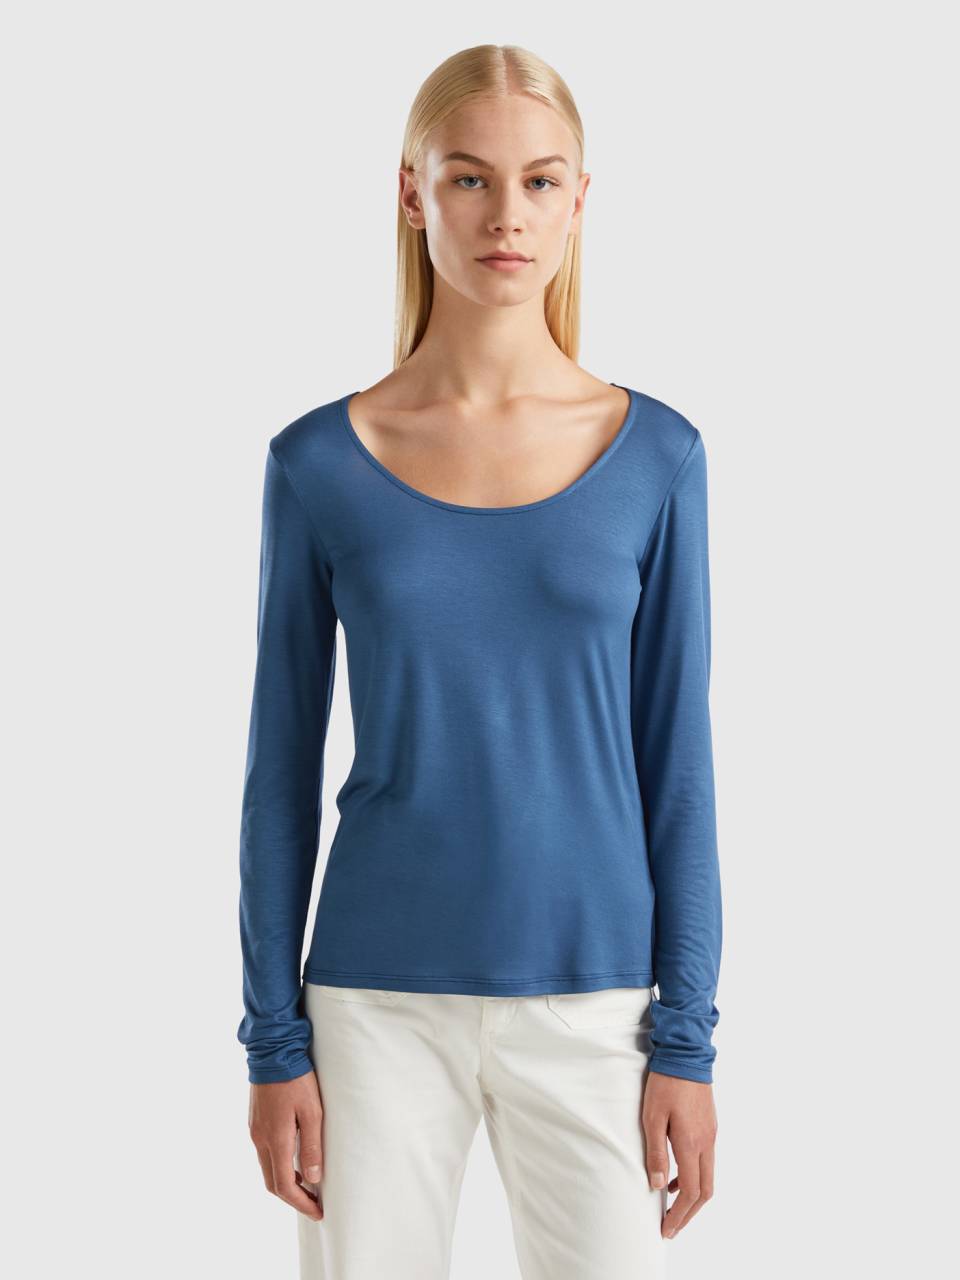 T-shirt in viscose Force Benetton stretch | Air sustainable - Blue